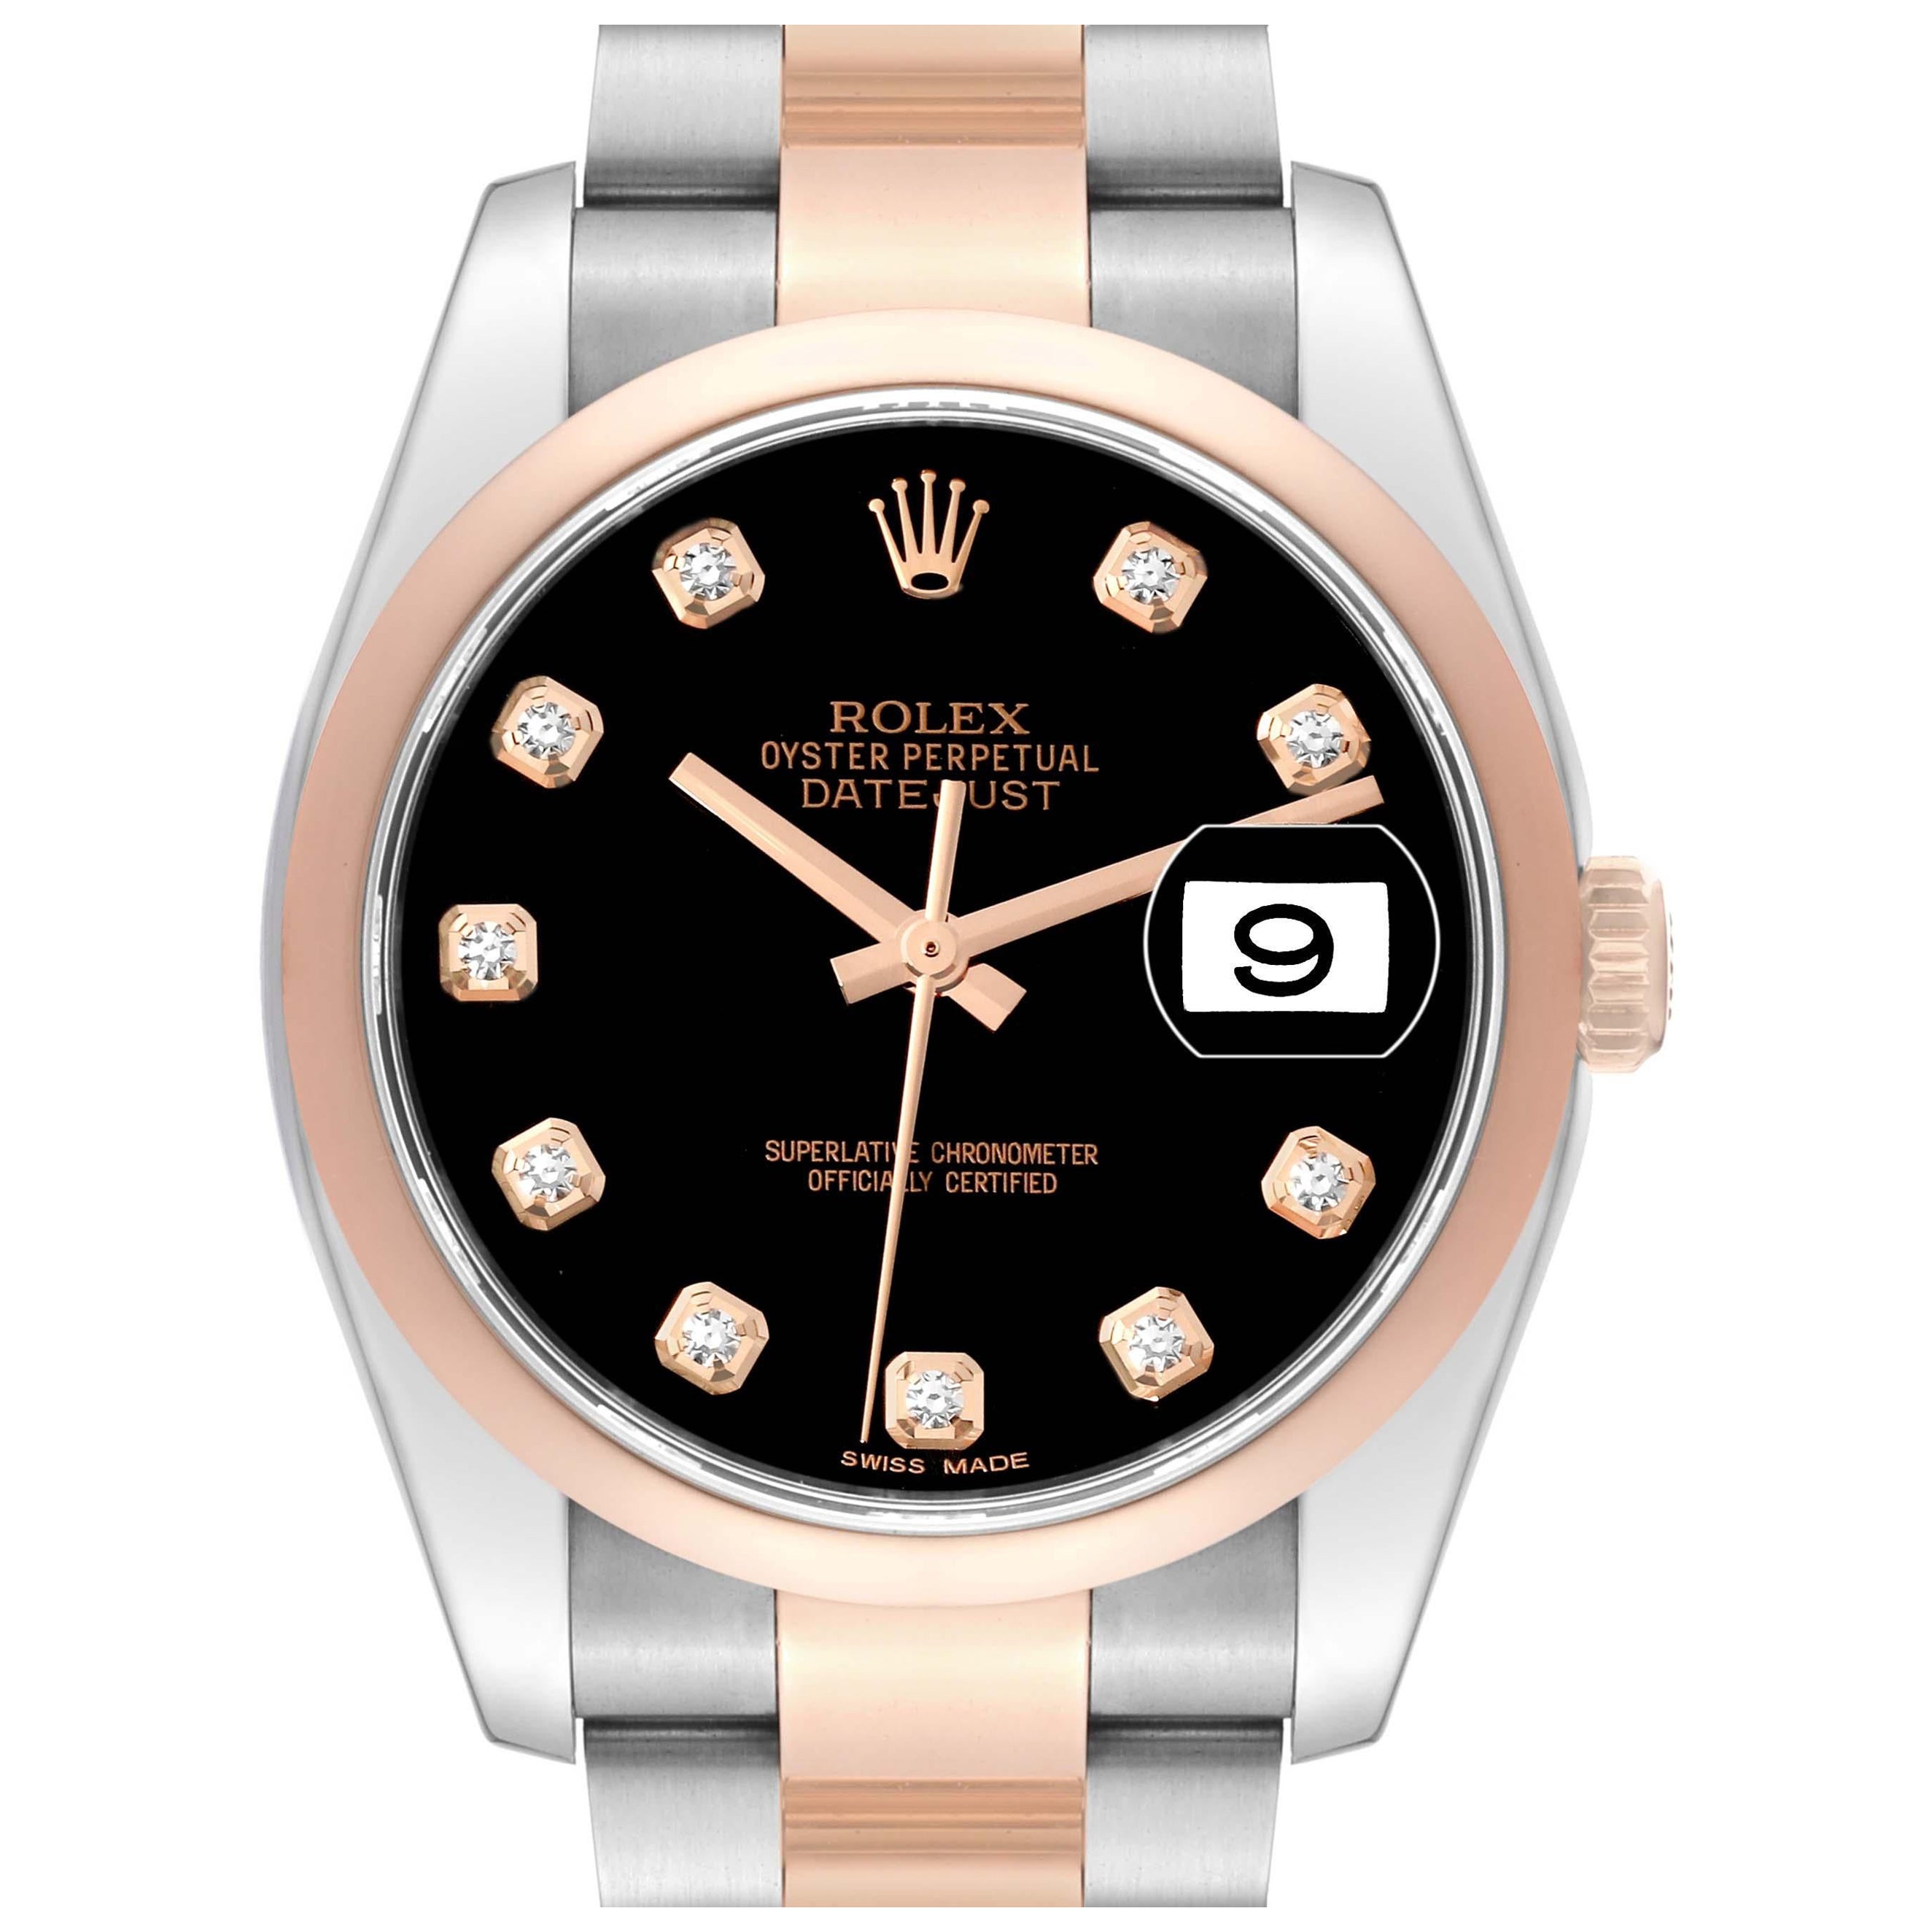 Rolex Datejust 36 Steel Rose Gold Black Diamond Dial Mens Watch 116201 For Sale